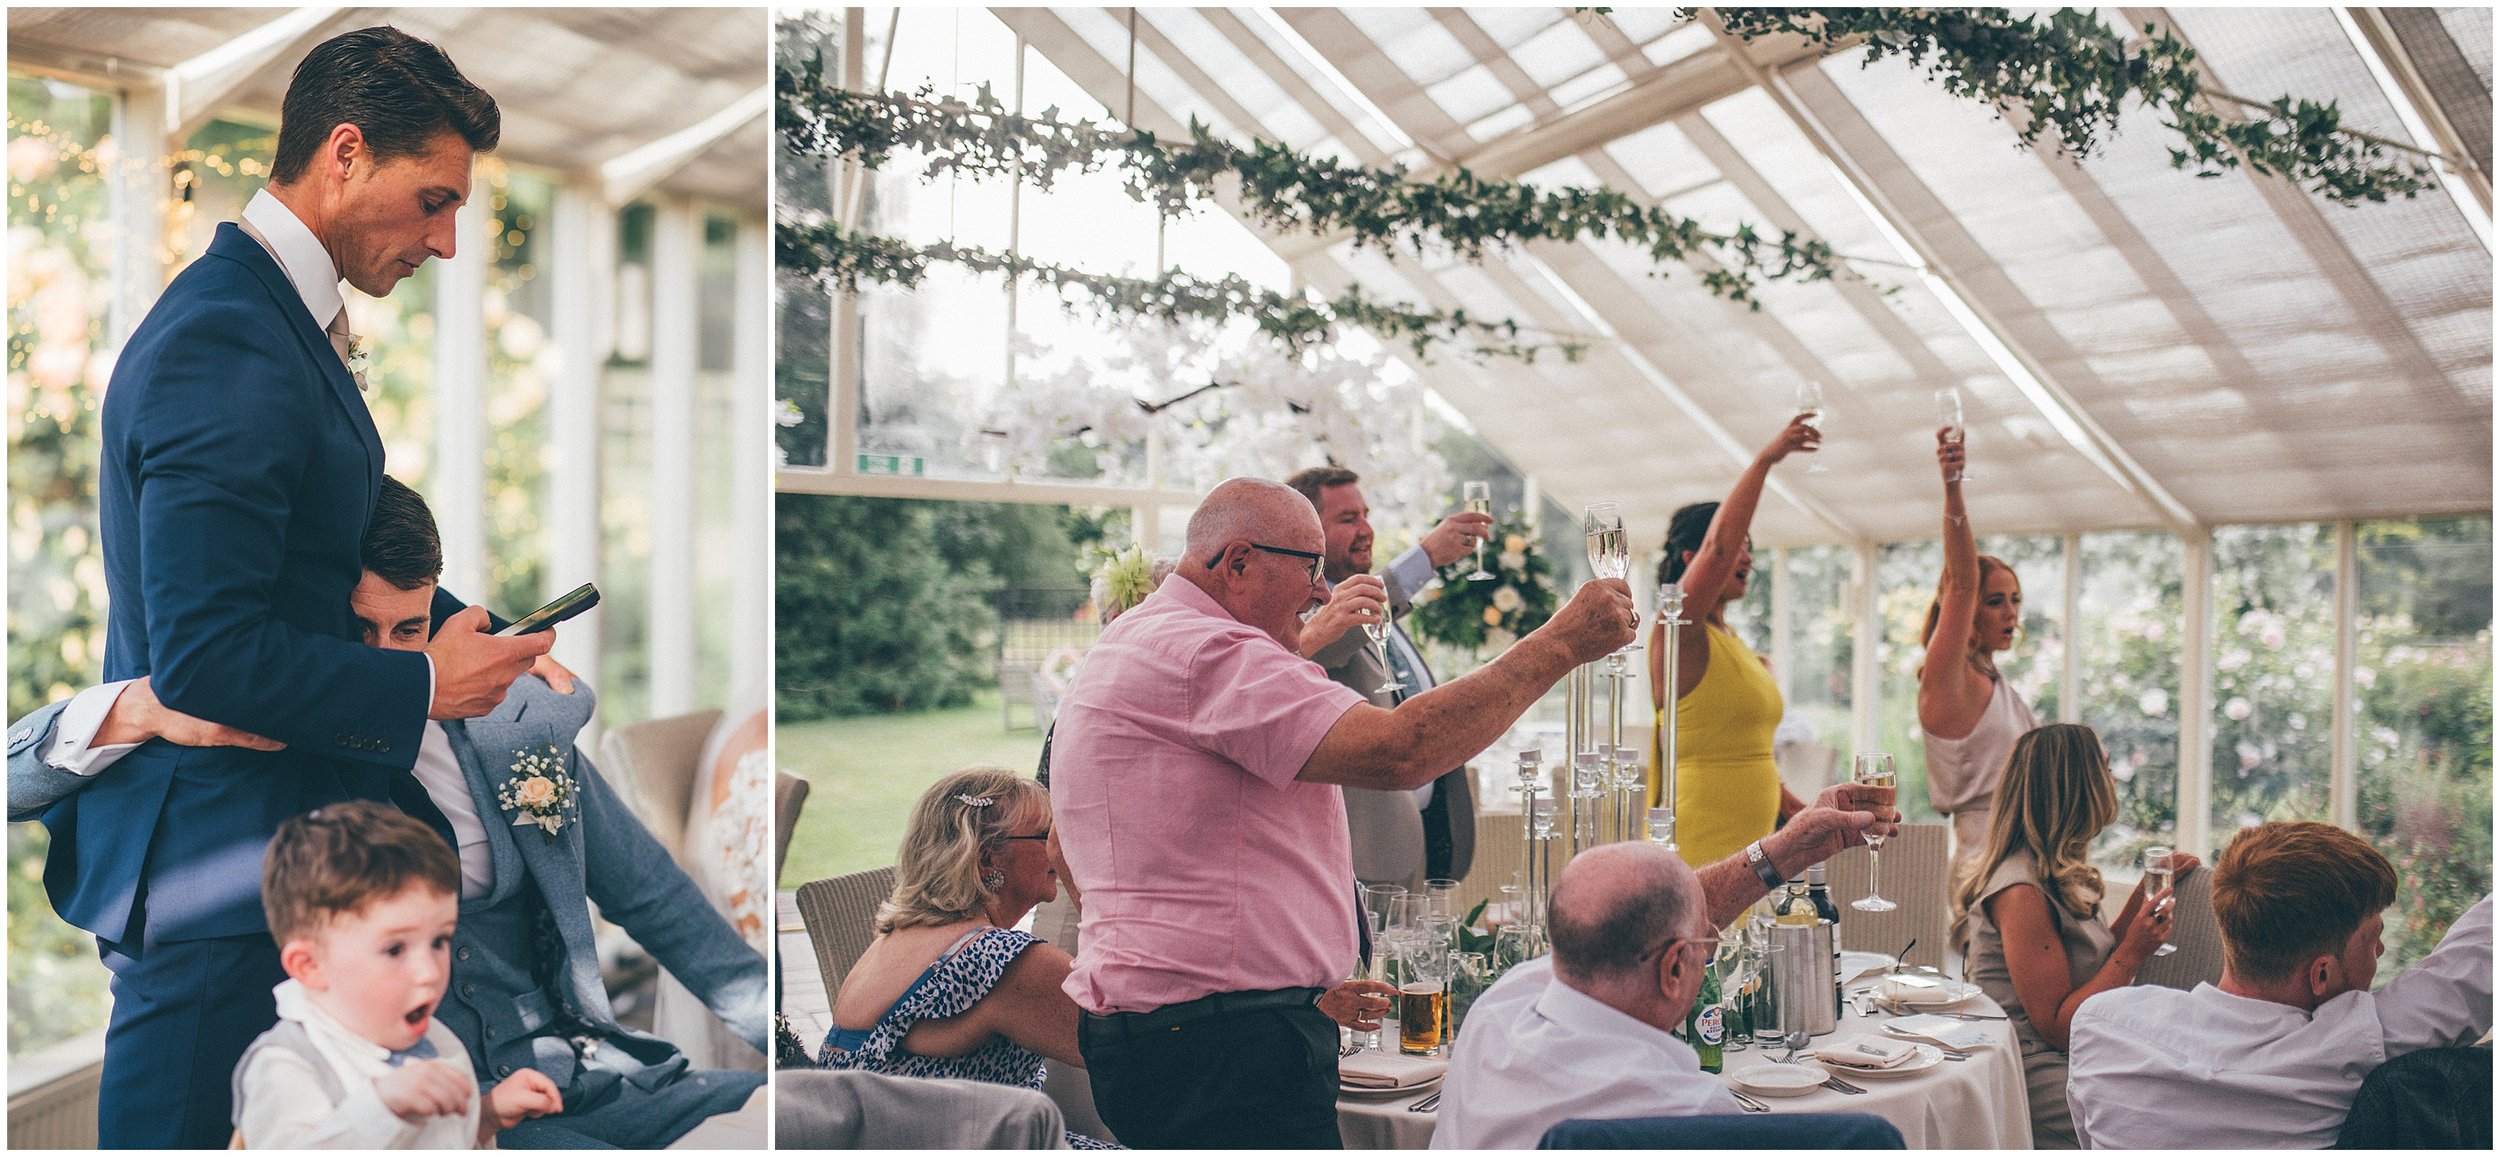 Bride and groom and guests enjoy speeches in the conservatory at Abbeywood Estate in Delamere, Cheshire.